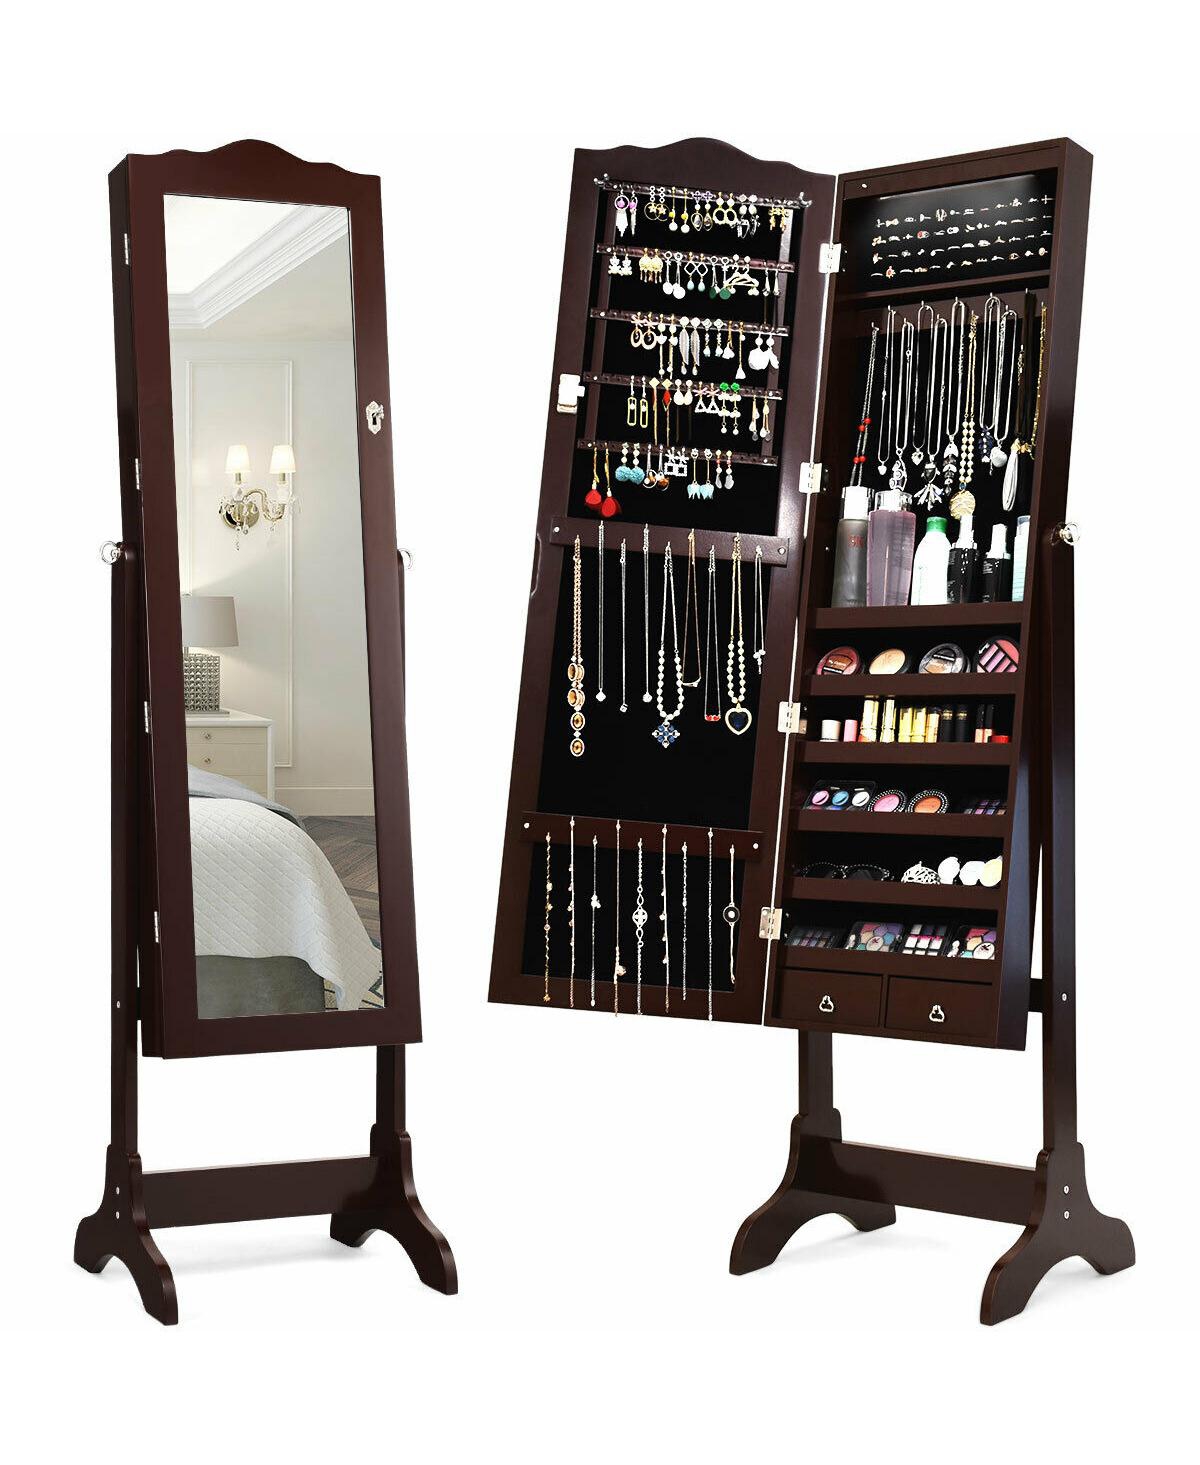 14 Led Jewelry Armoire Cabinet with Full Length Mirror and 4 Tilting Angles-Coffee - Dark Brown